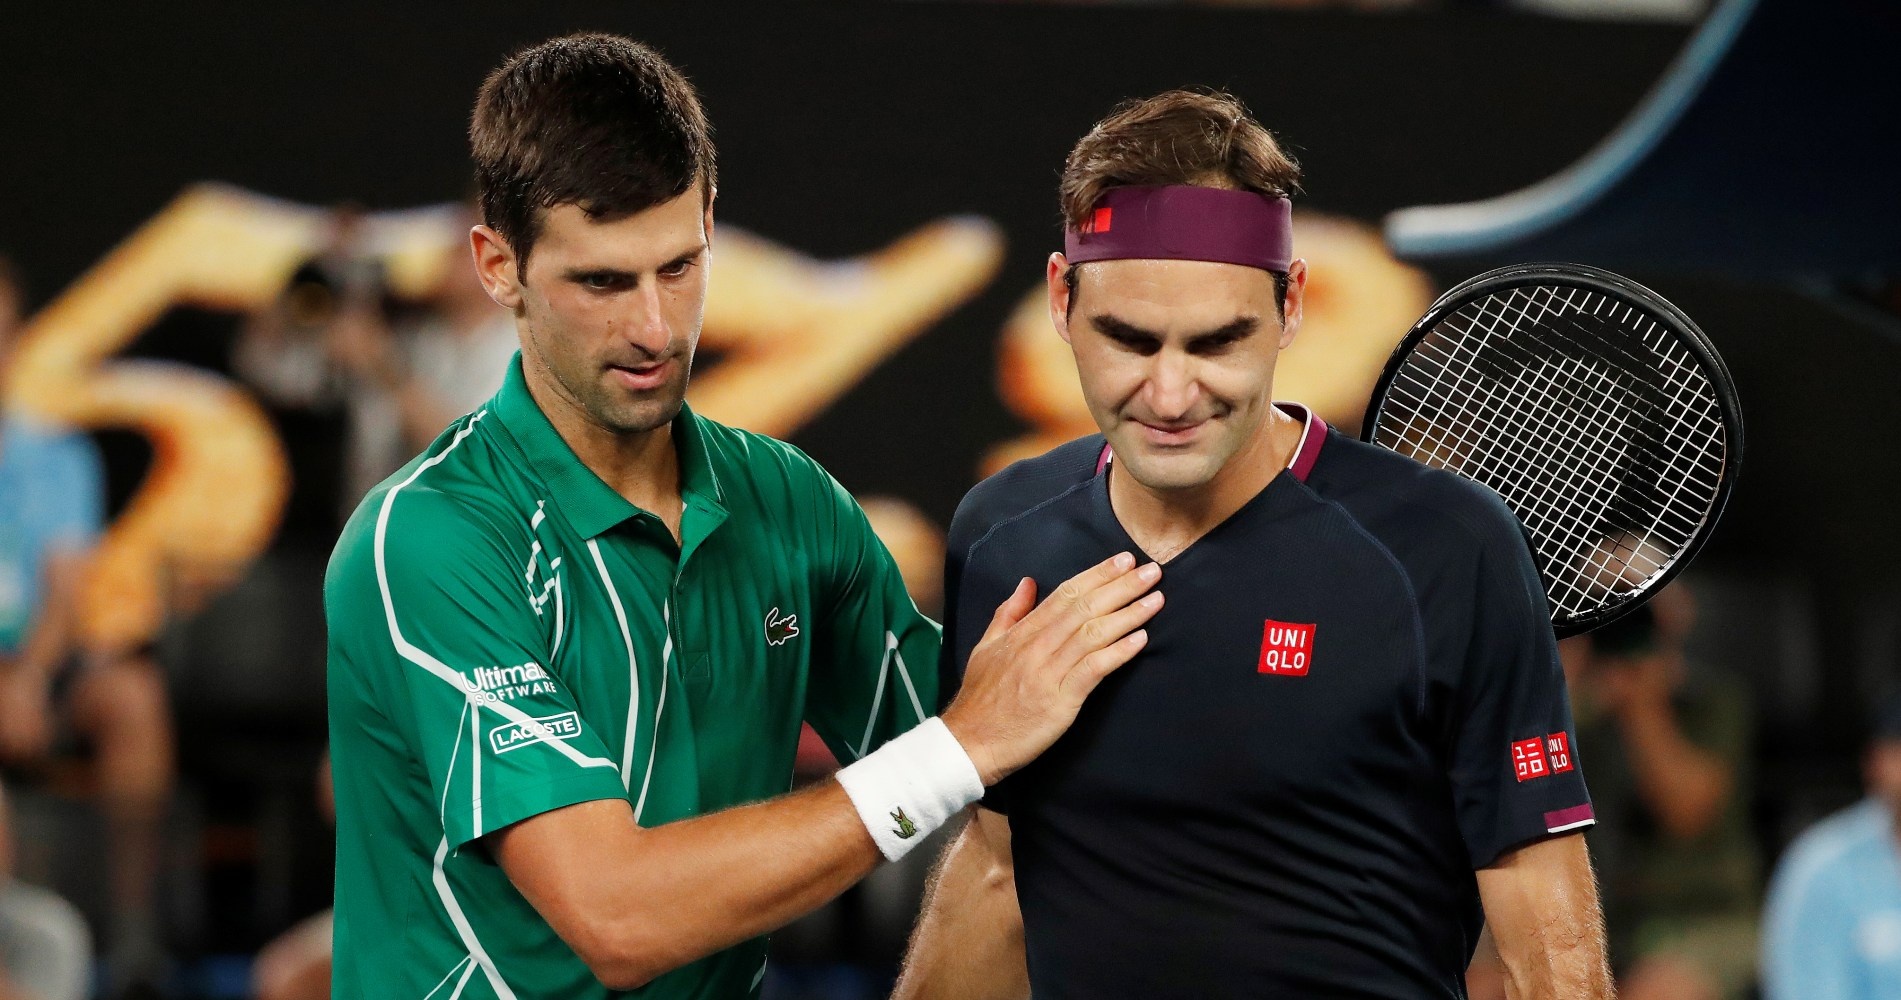 Federer and Djokovic at the net after their their Australian Open clash in 2020.